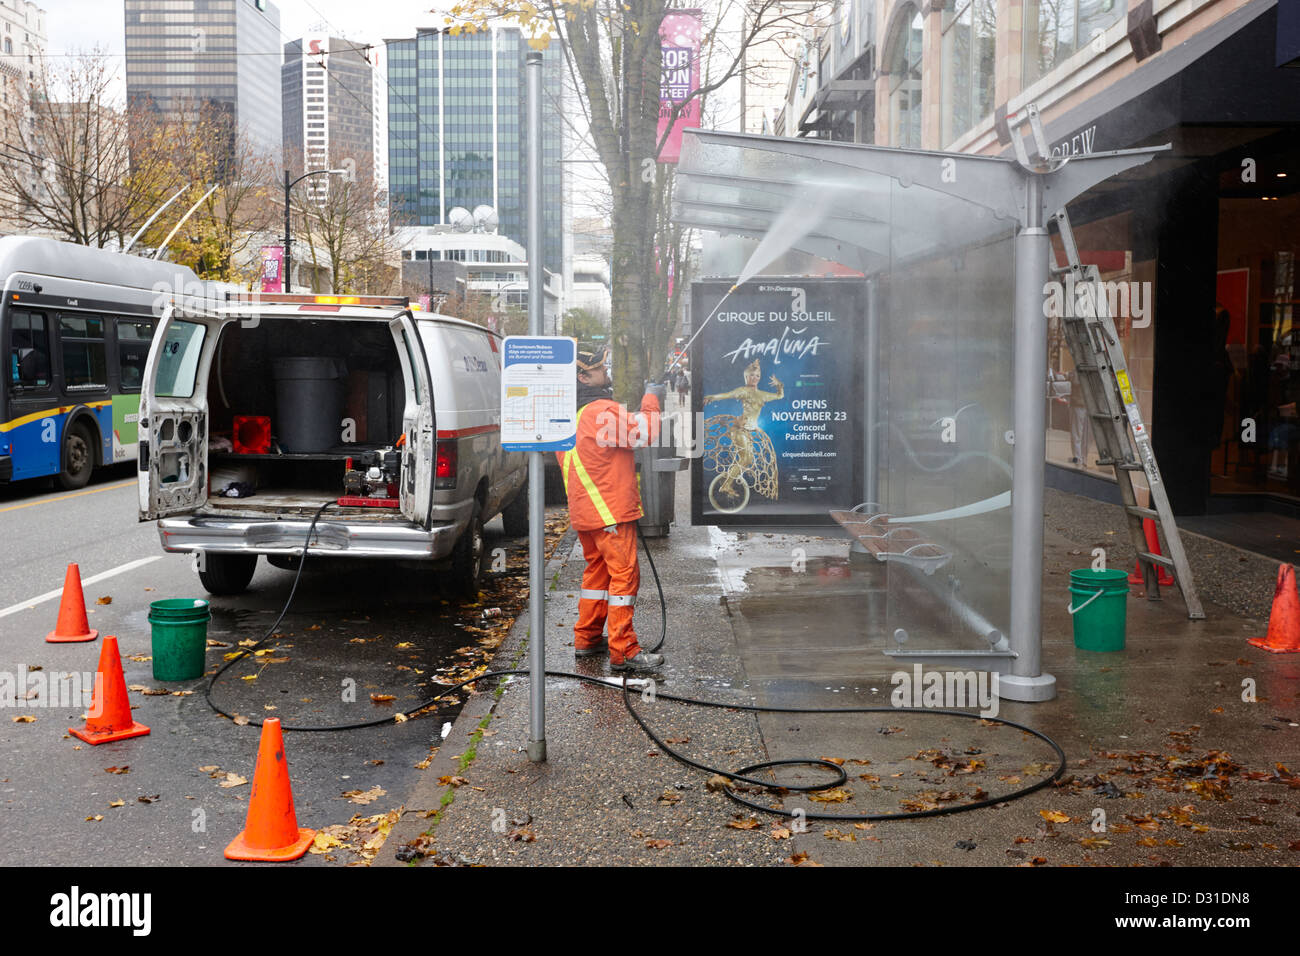 private company cleaning team cleaning a bus shelter with power hose Vancouver BC Canada Stock Photo